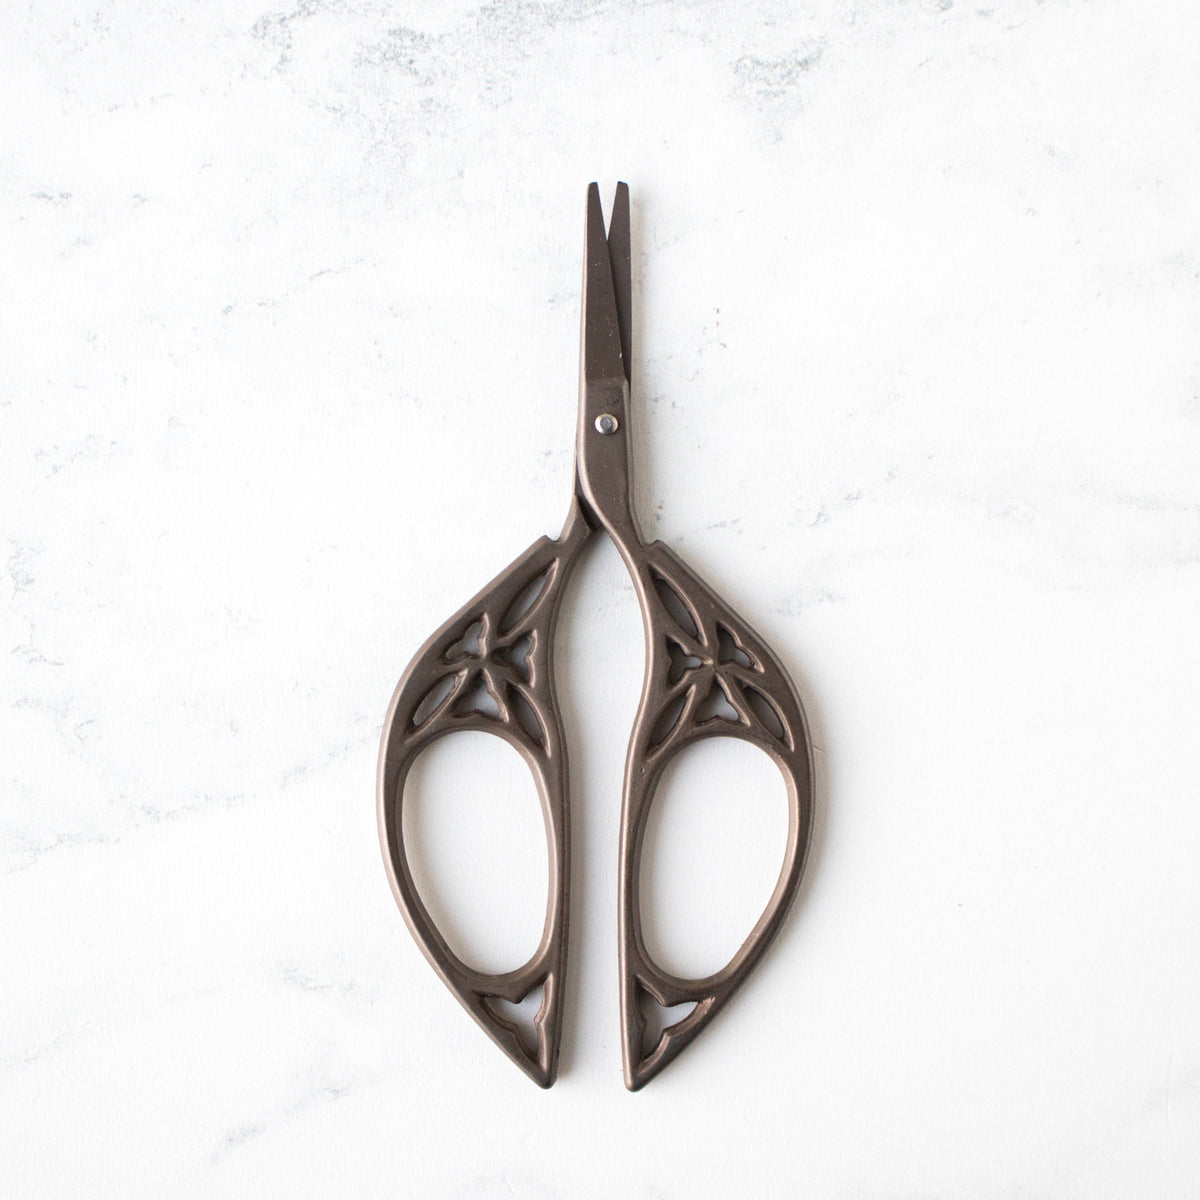 Butterfly Wing Embroidery Scissors